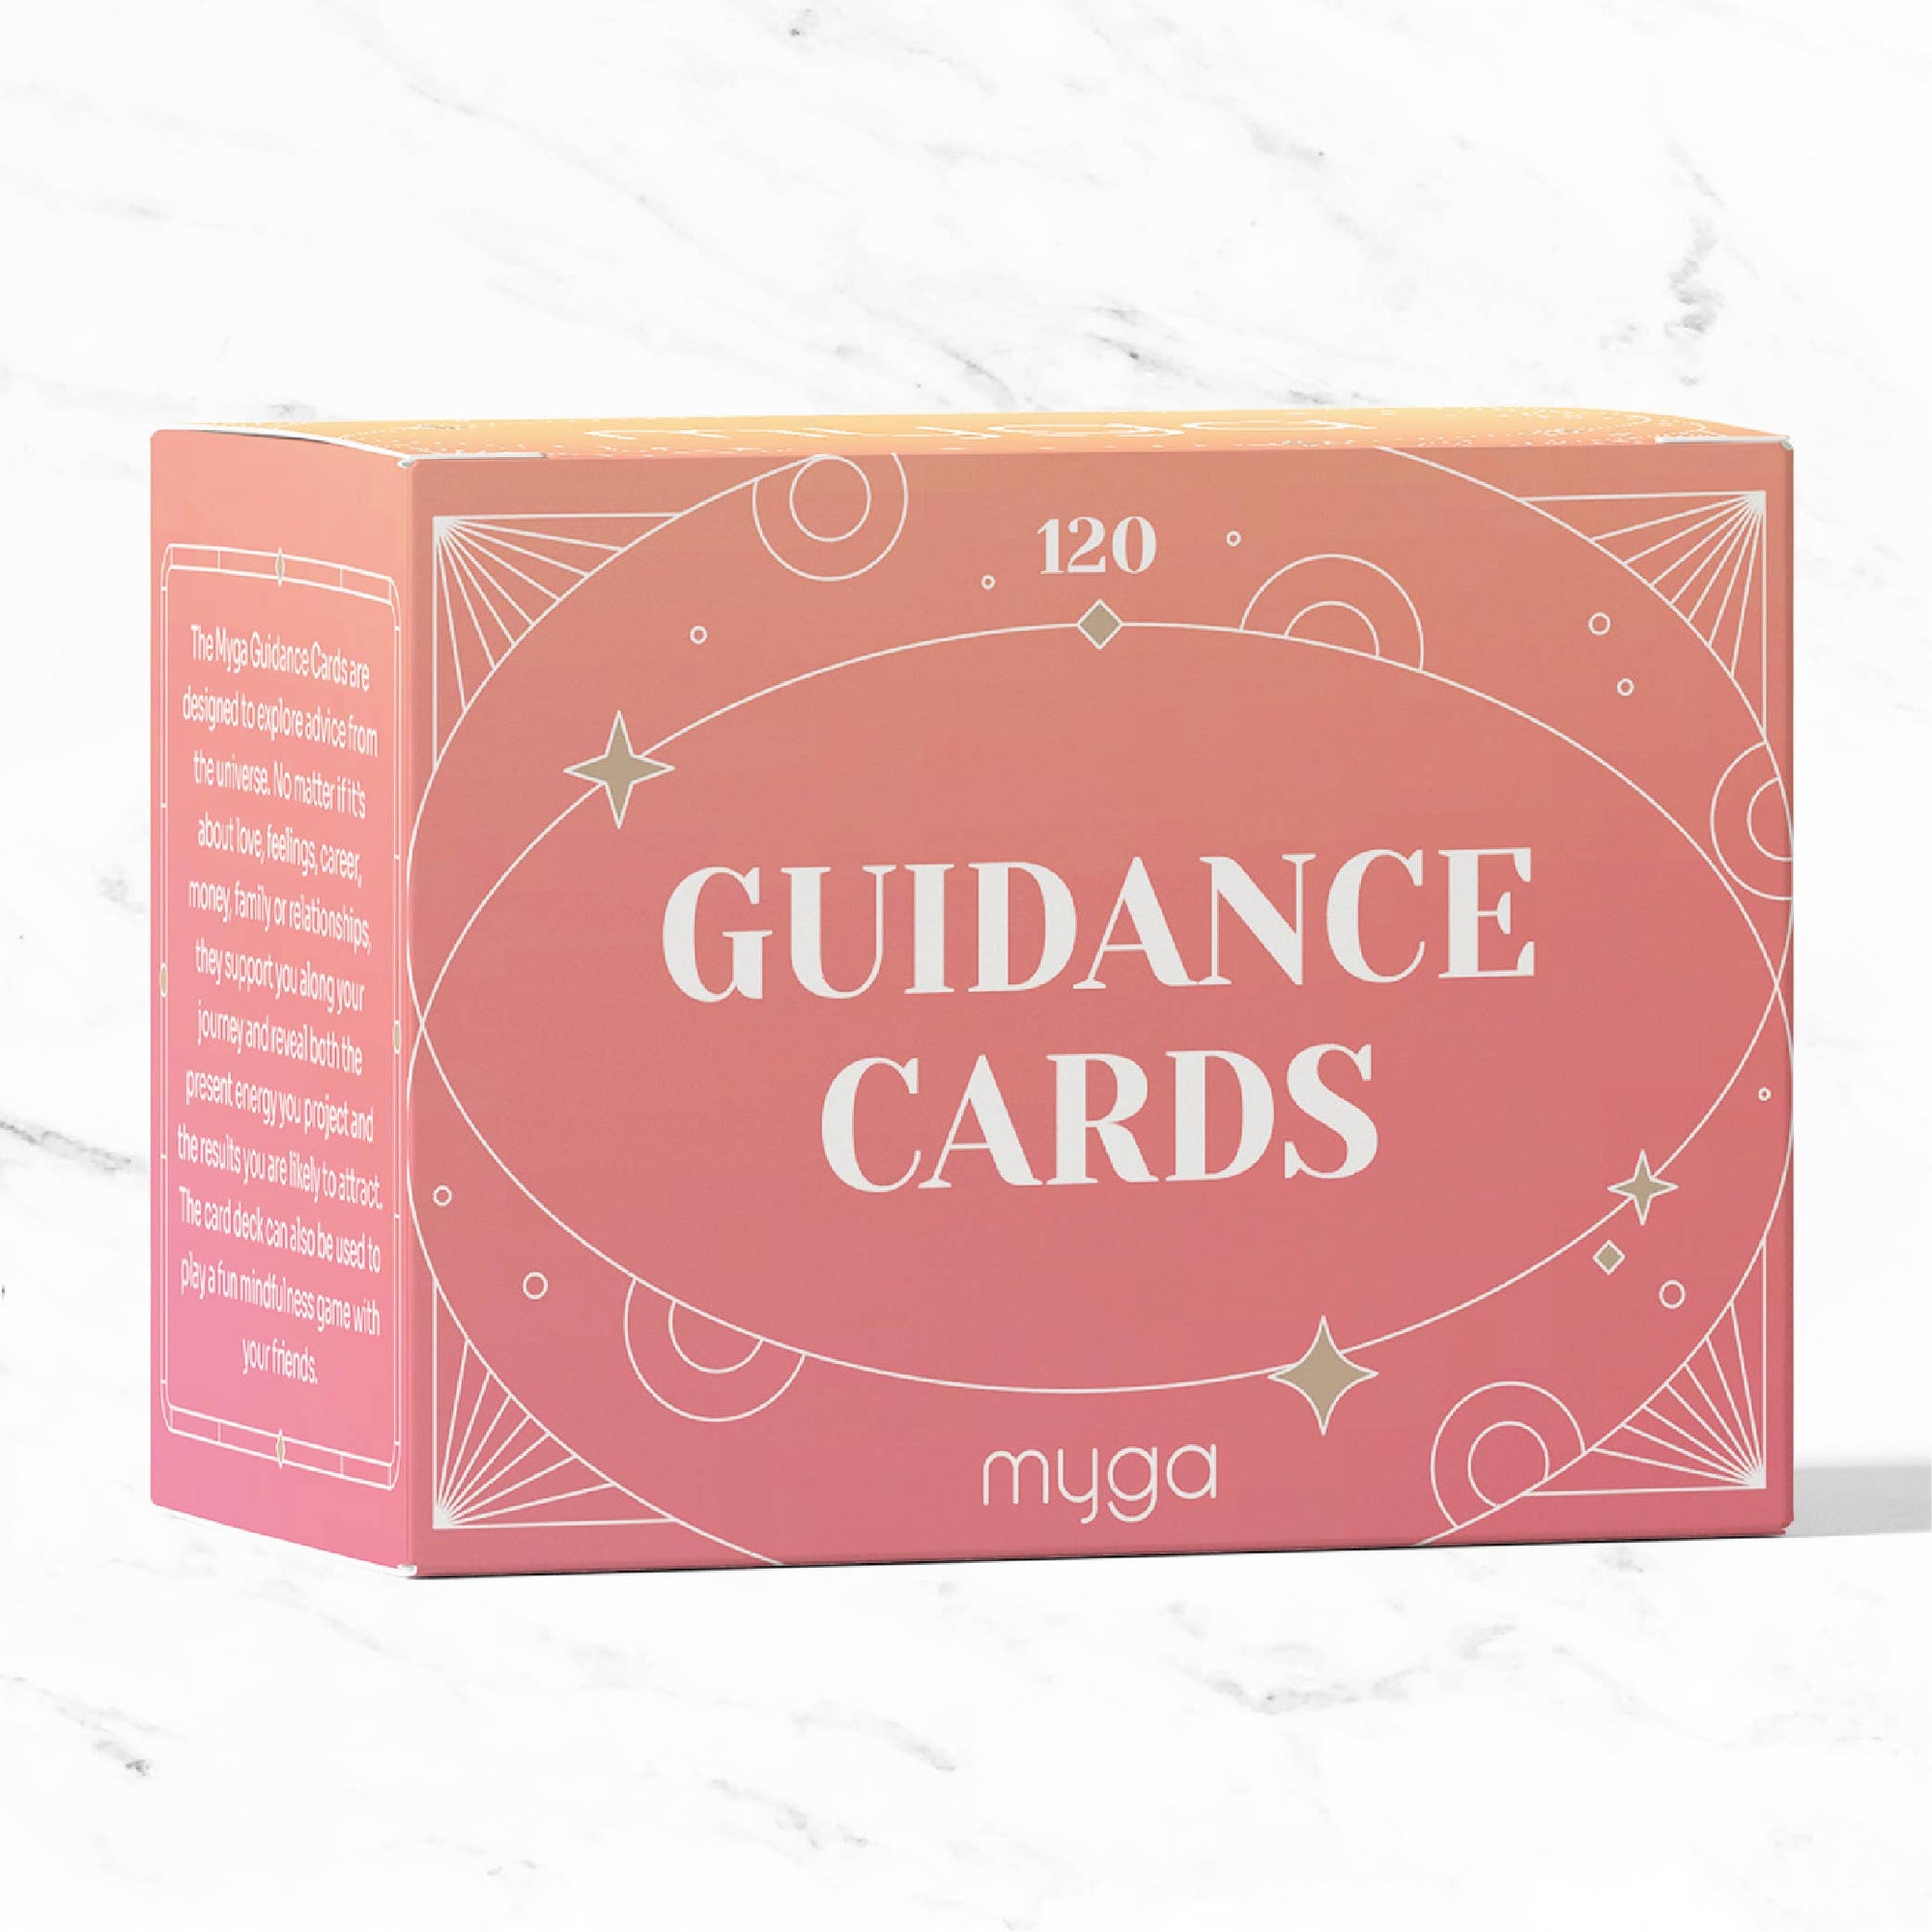 Daily Guidance Cards